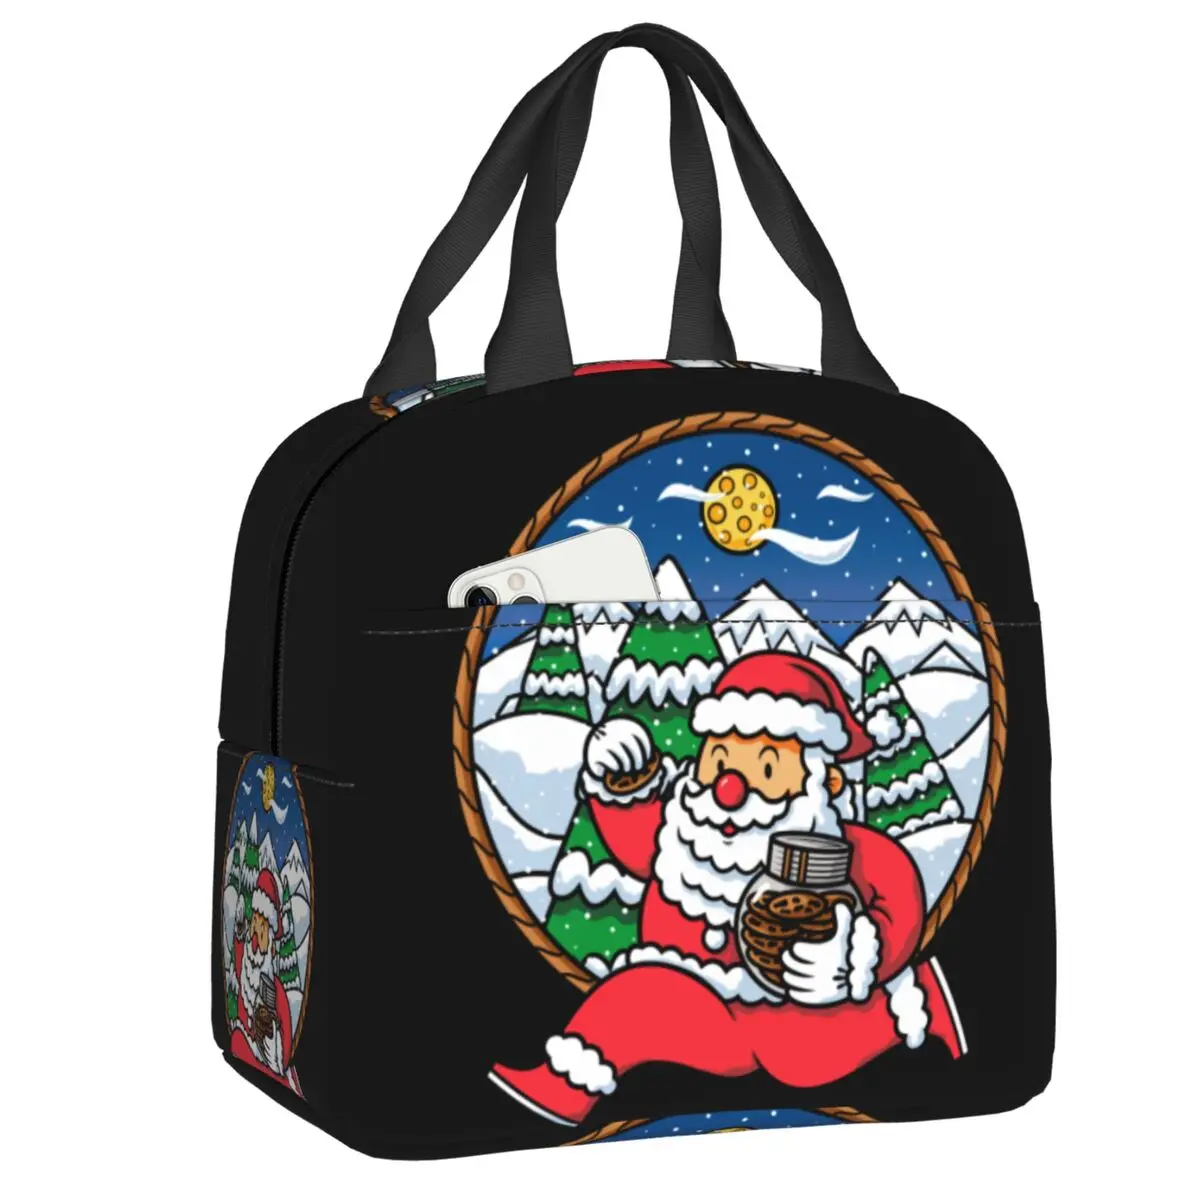 

Santa Claus Run Insulated Lunch Tote Bag for Women Christmas Resuable Cooler Thermal Bento Box Kids School Children